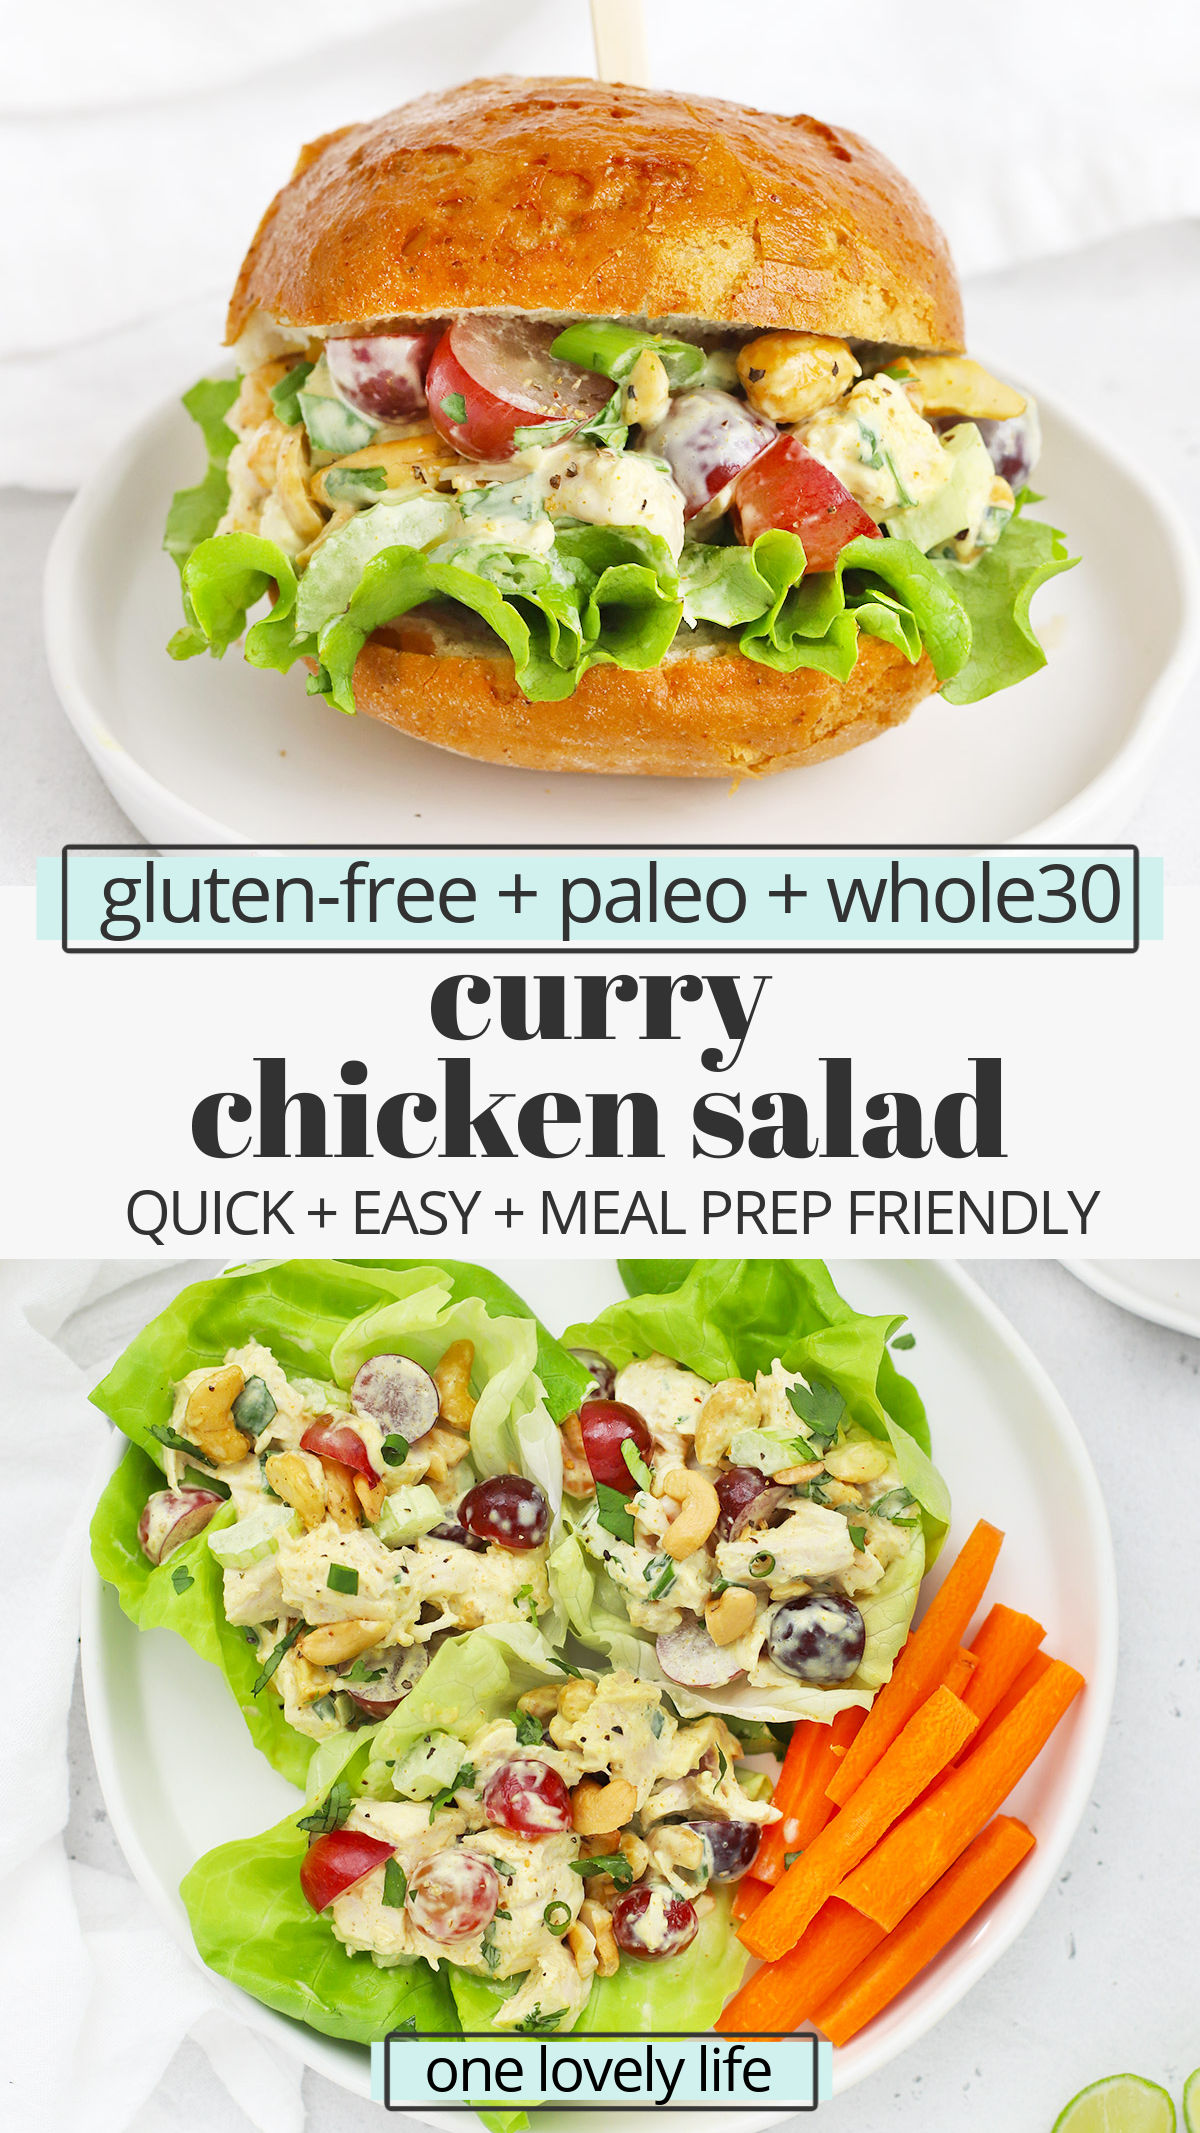 Curry Chicken Salad - Our healthy curry chicken salad with grapes is easy, fresh, and delicious. A perfect easy lunch or dinner any day of the week. (Gluten-Free, Paleo-Friendly, Whole30-Friendly) // Paleo Curry Chicken Salad // Whole30 Curry Chicken Salad // Healthy Meal-Prep Lunch